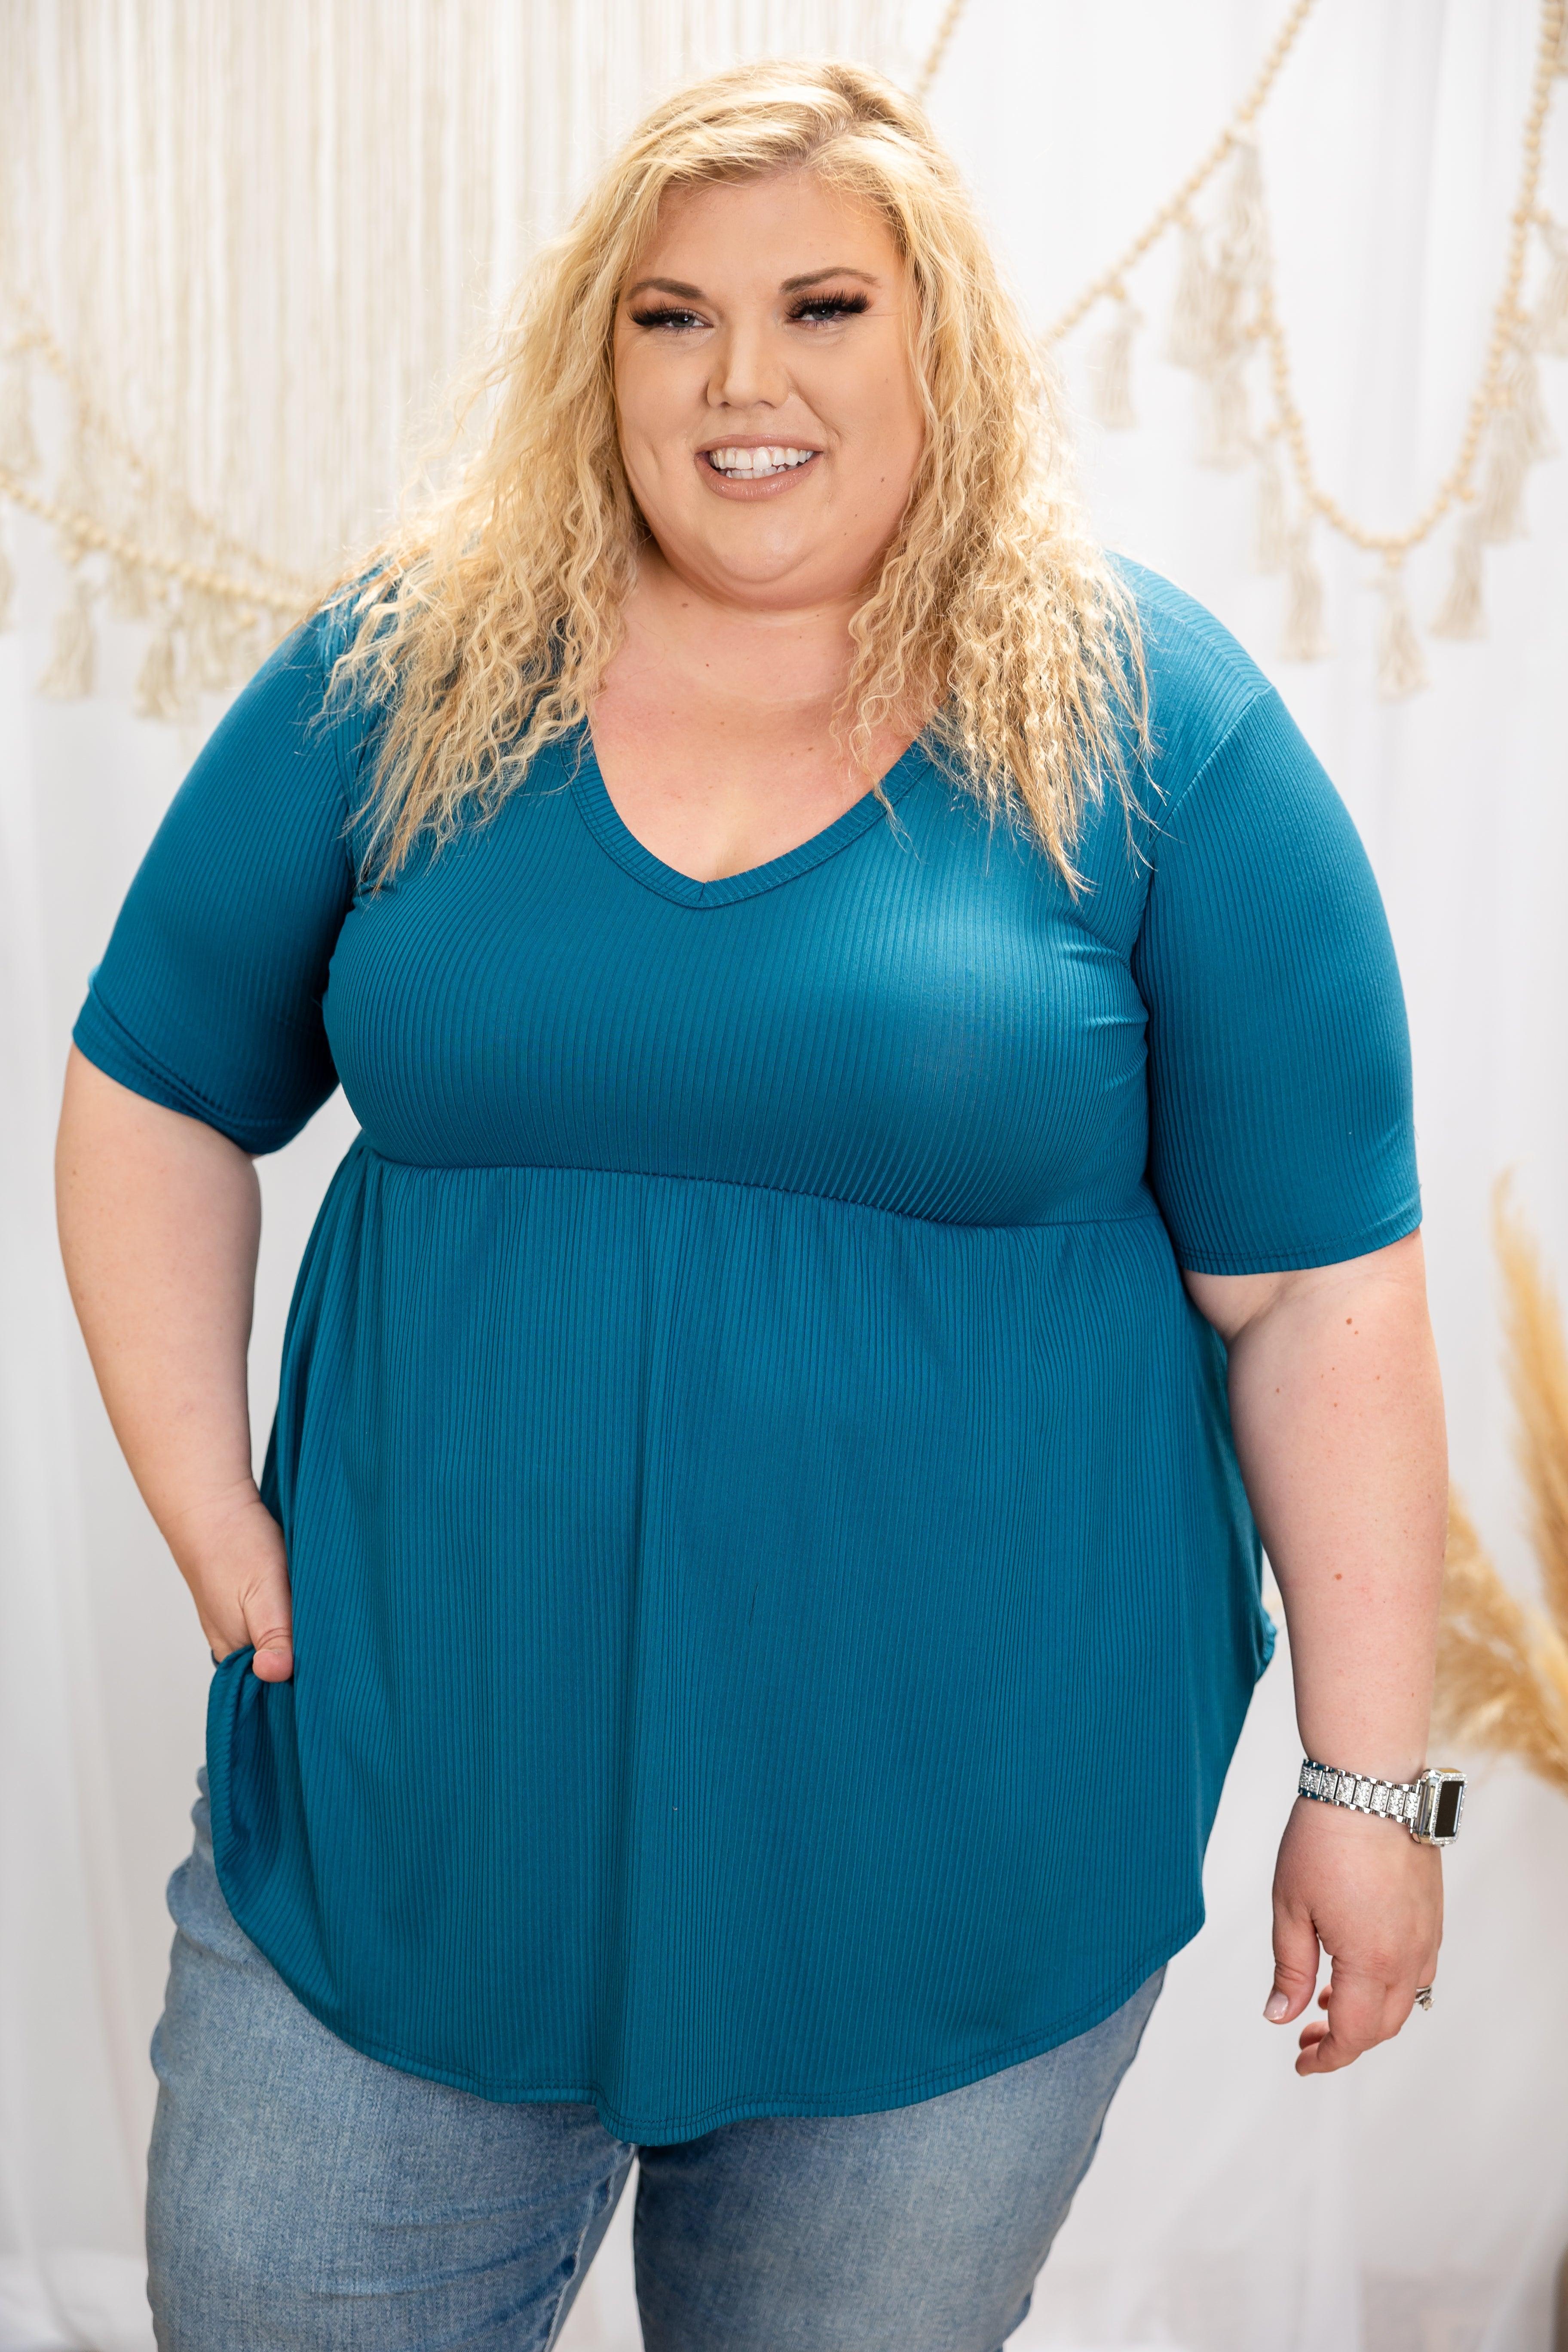 Teal Me Everything - Babydoll Giftmas Boutique Simplified   